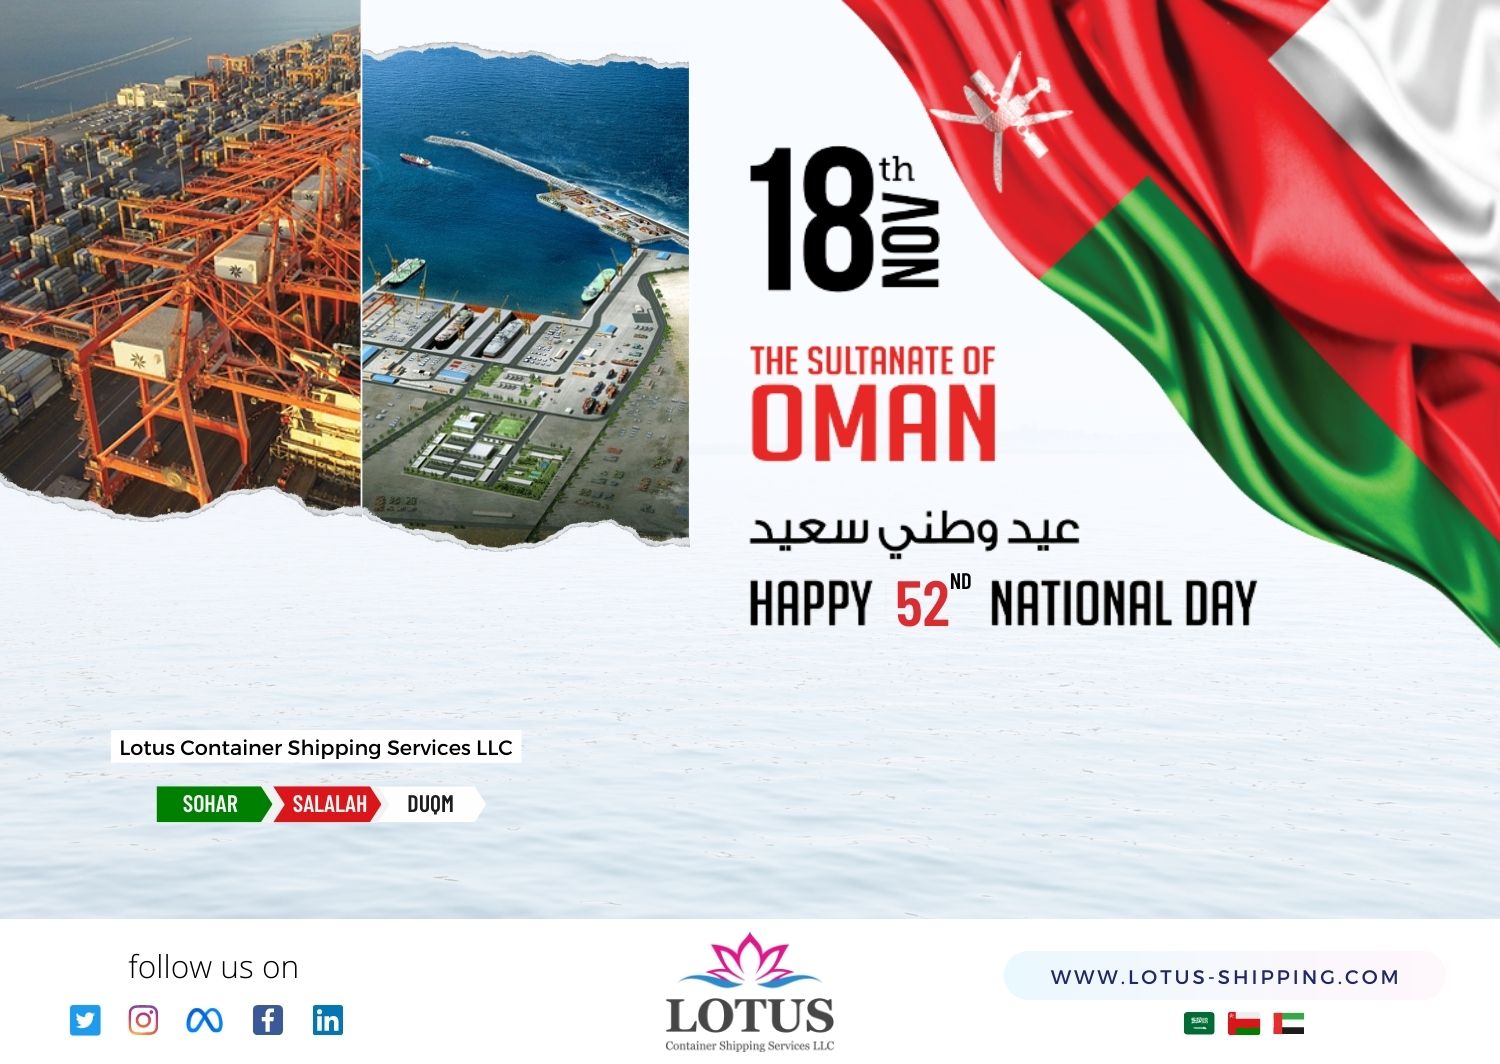 Happy 52ND Oman National Day. Lotus Container Shipping Services LLC